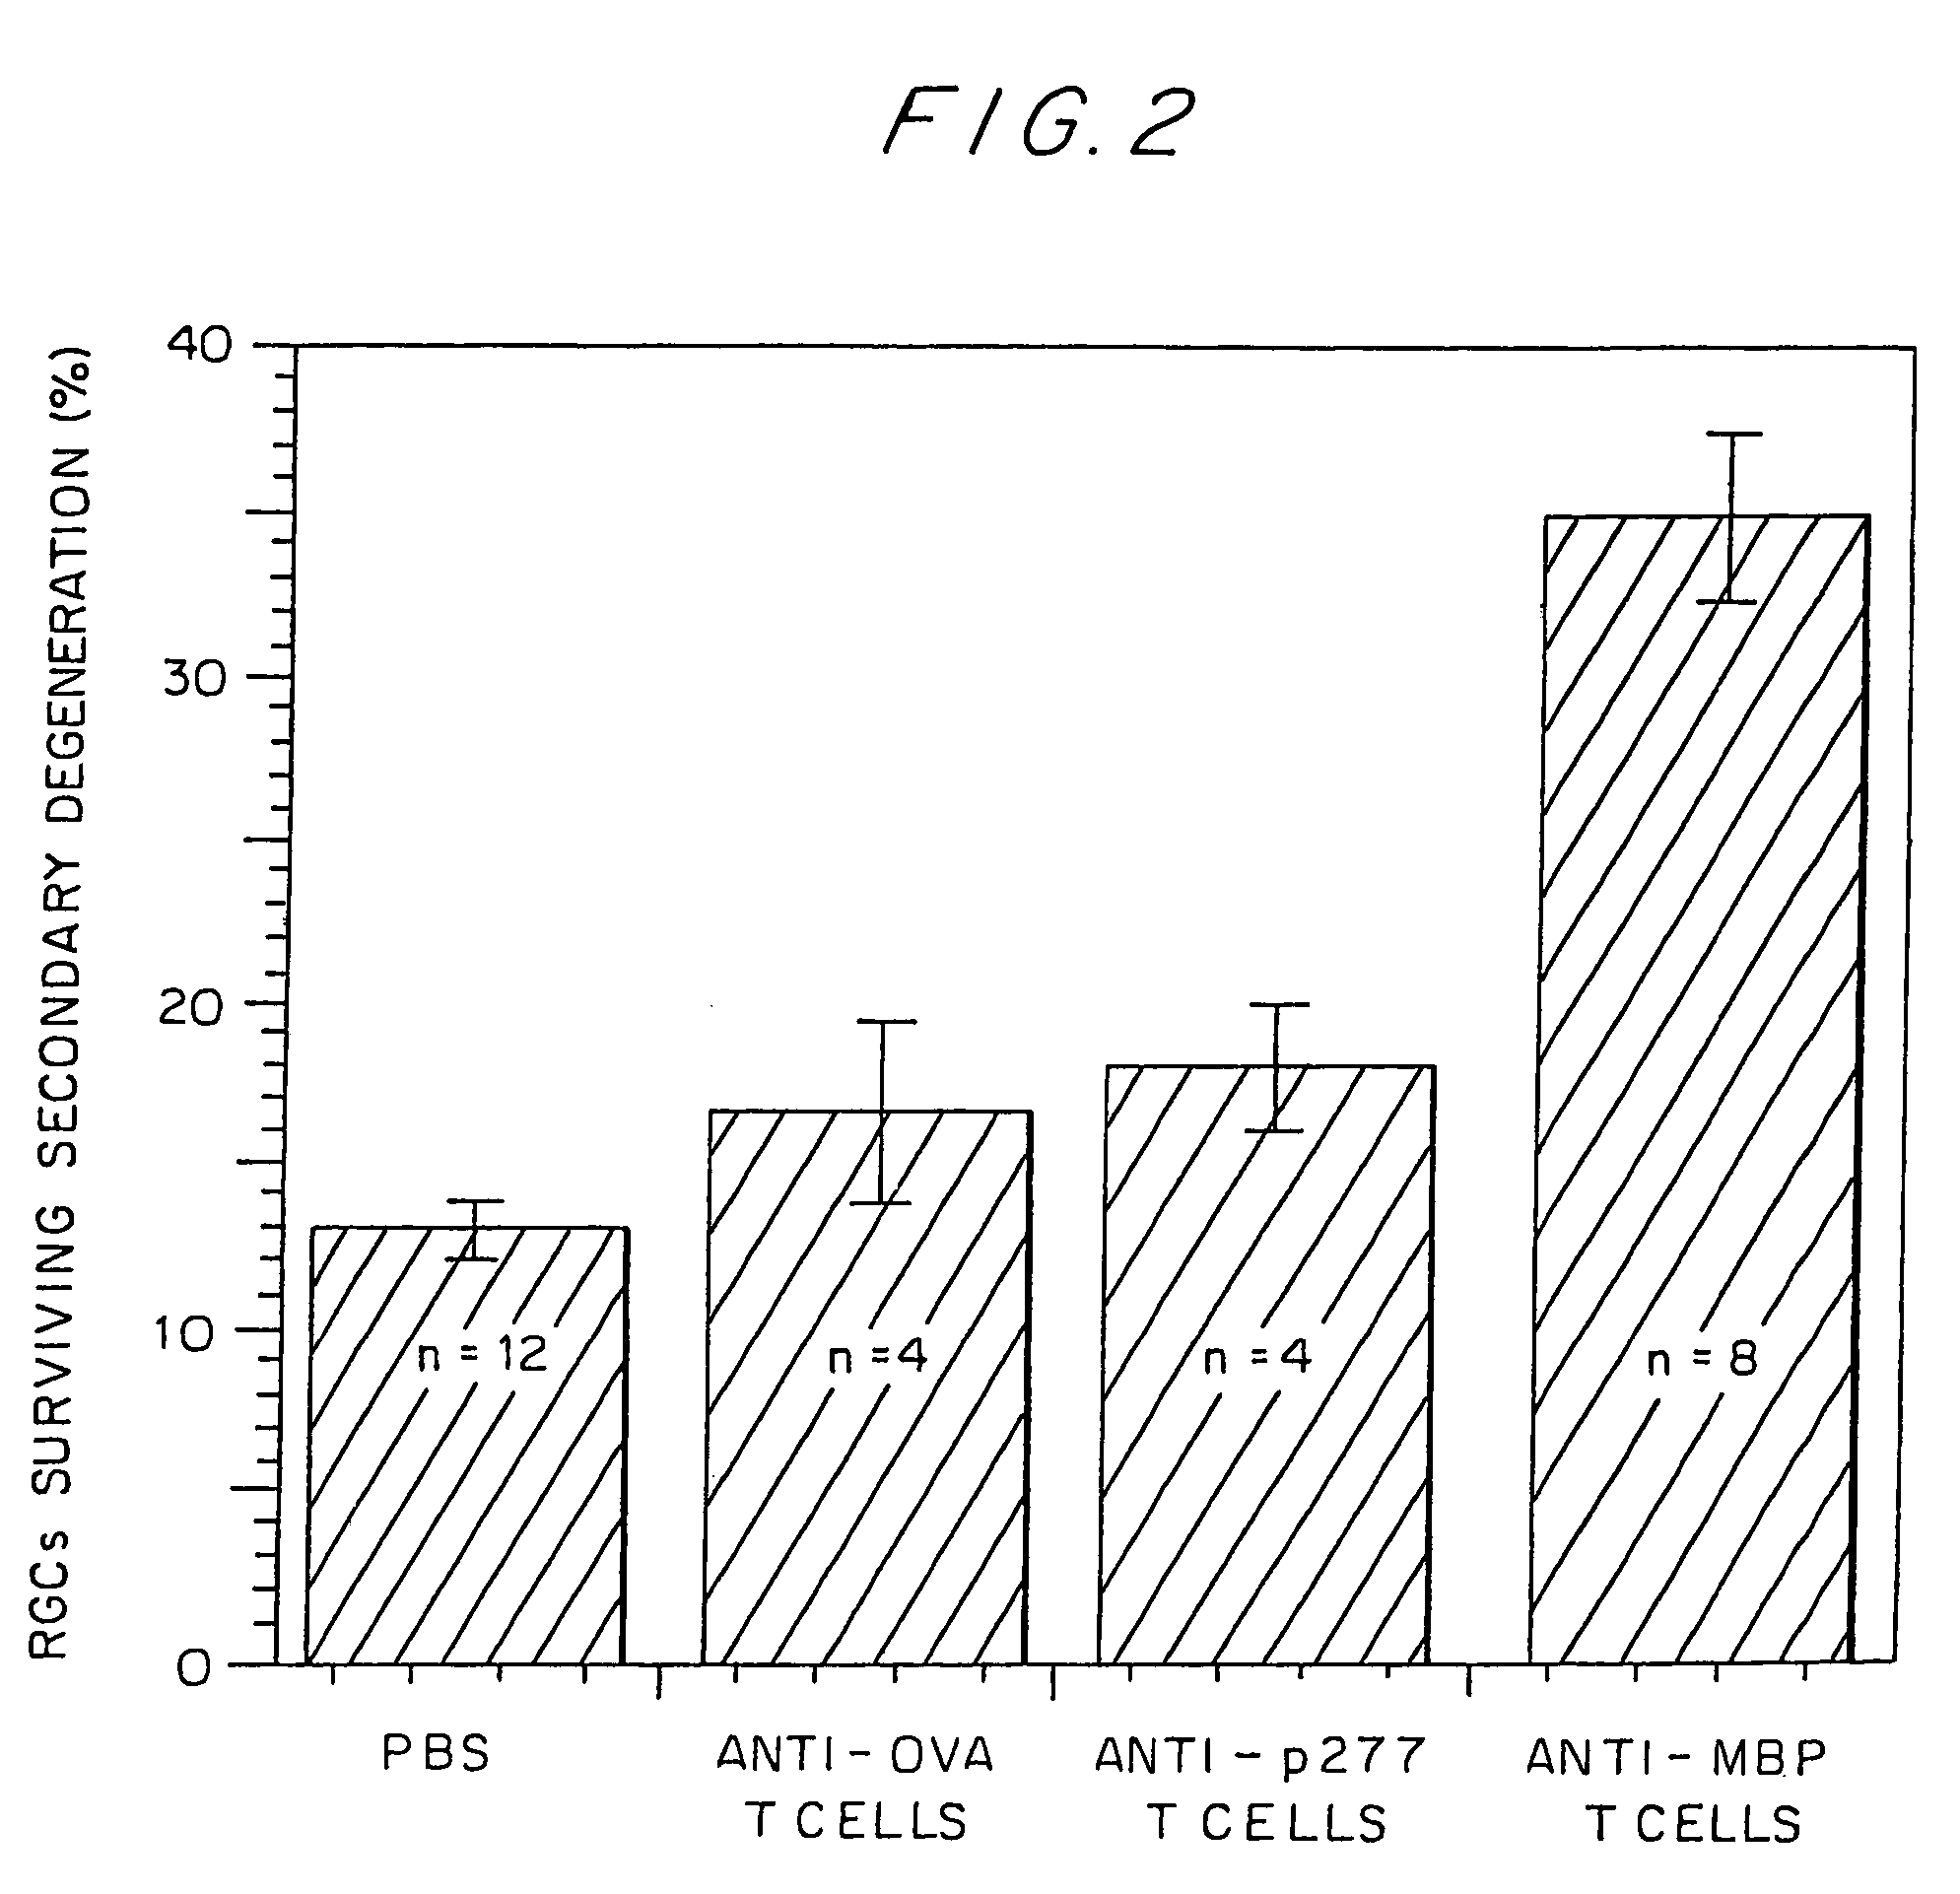 Method for reducing neuronal degeneration so as to ameliorate the effects of injury or disease